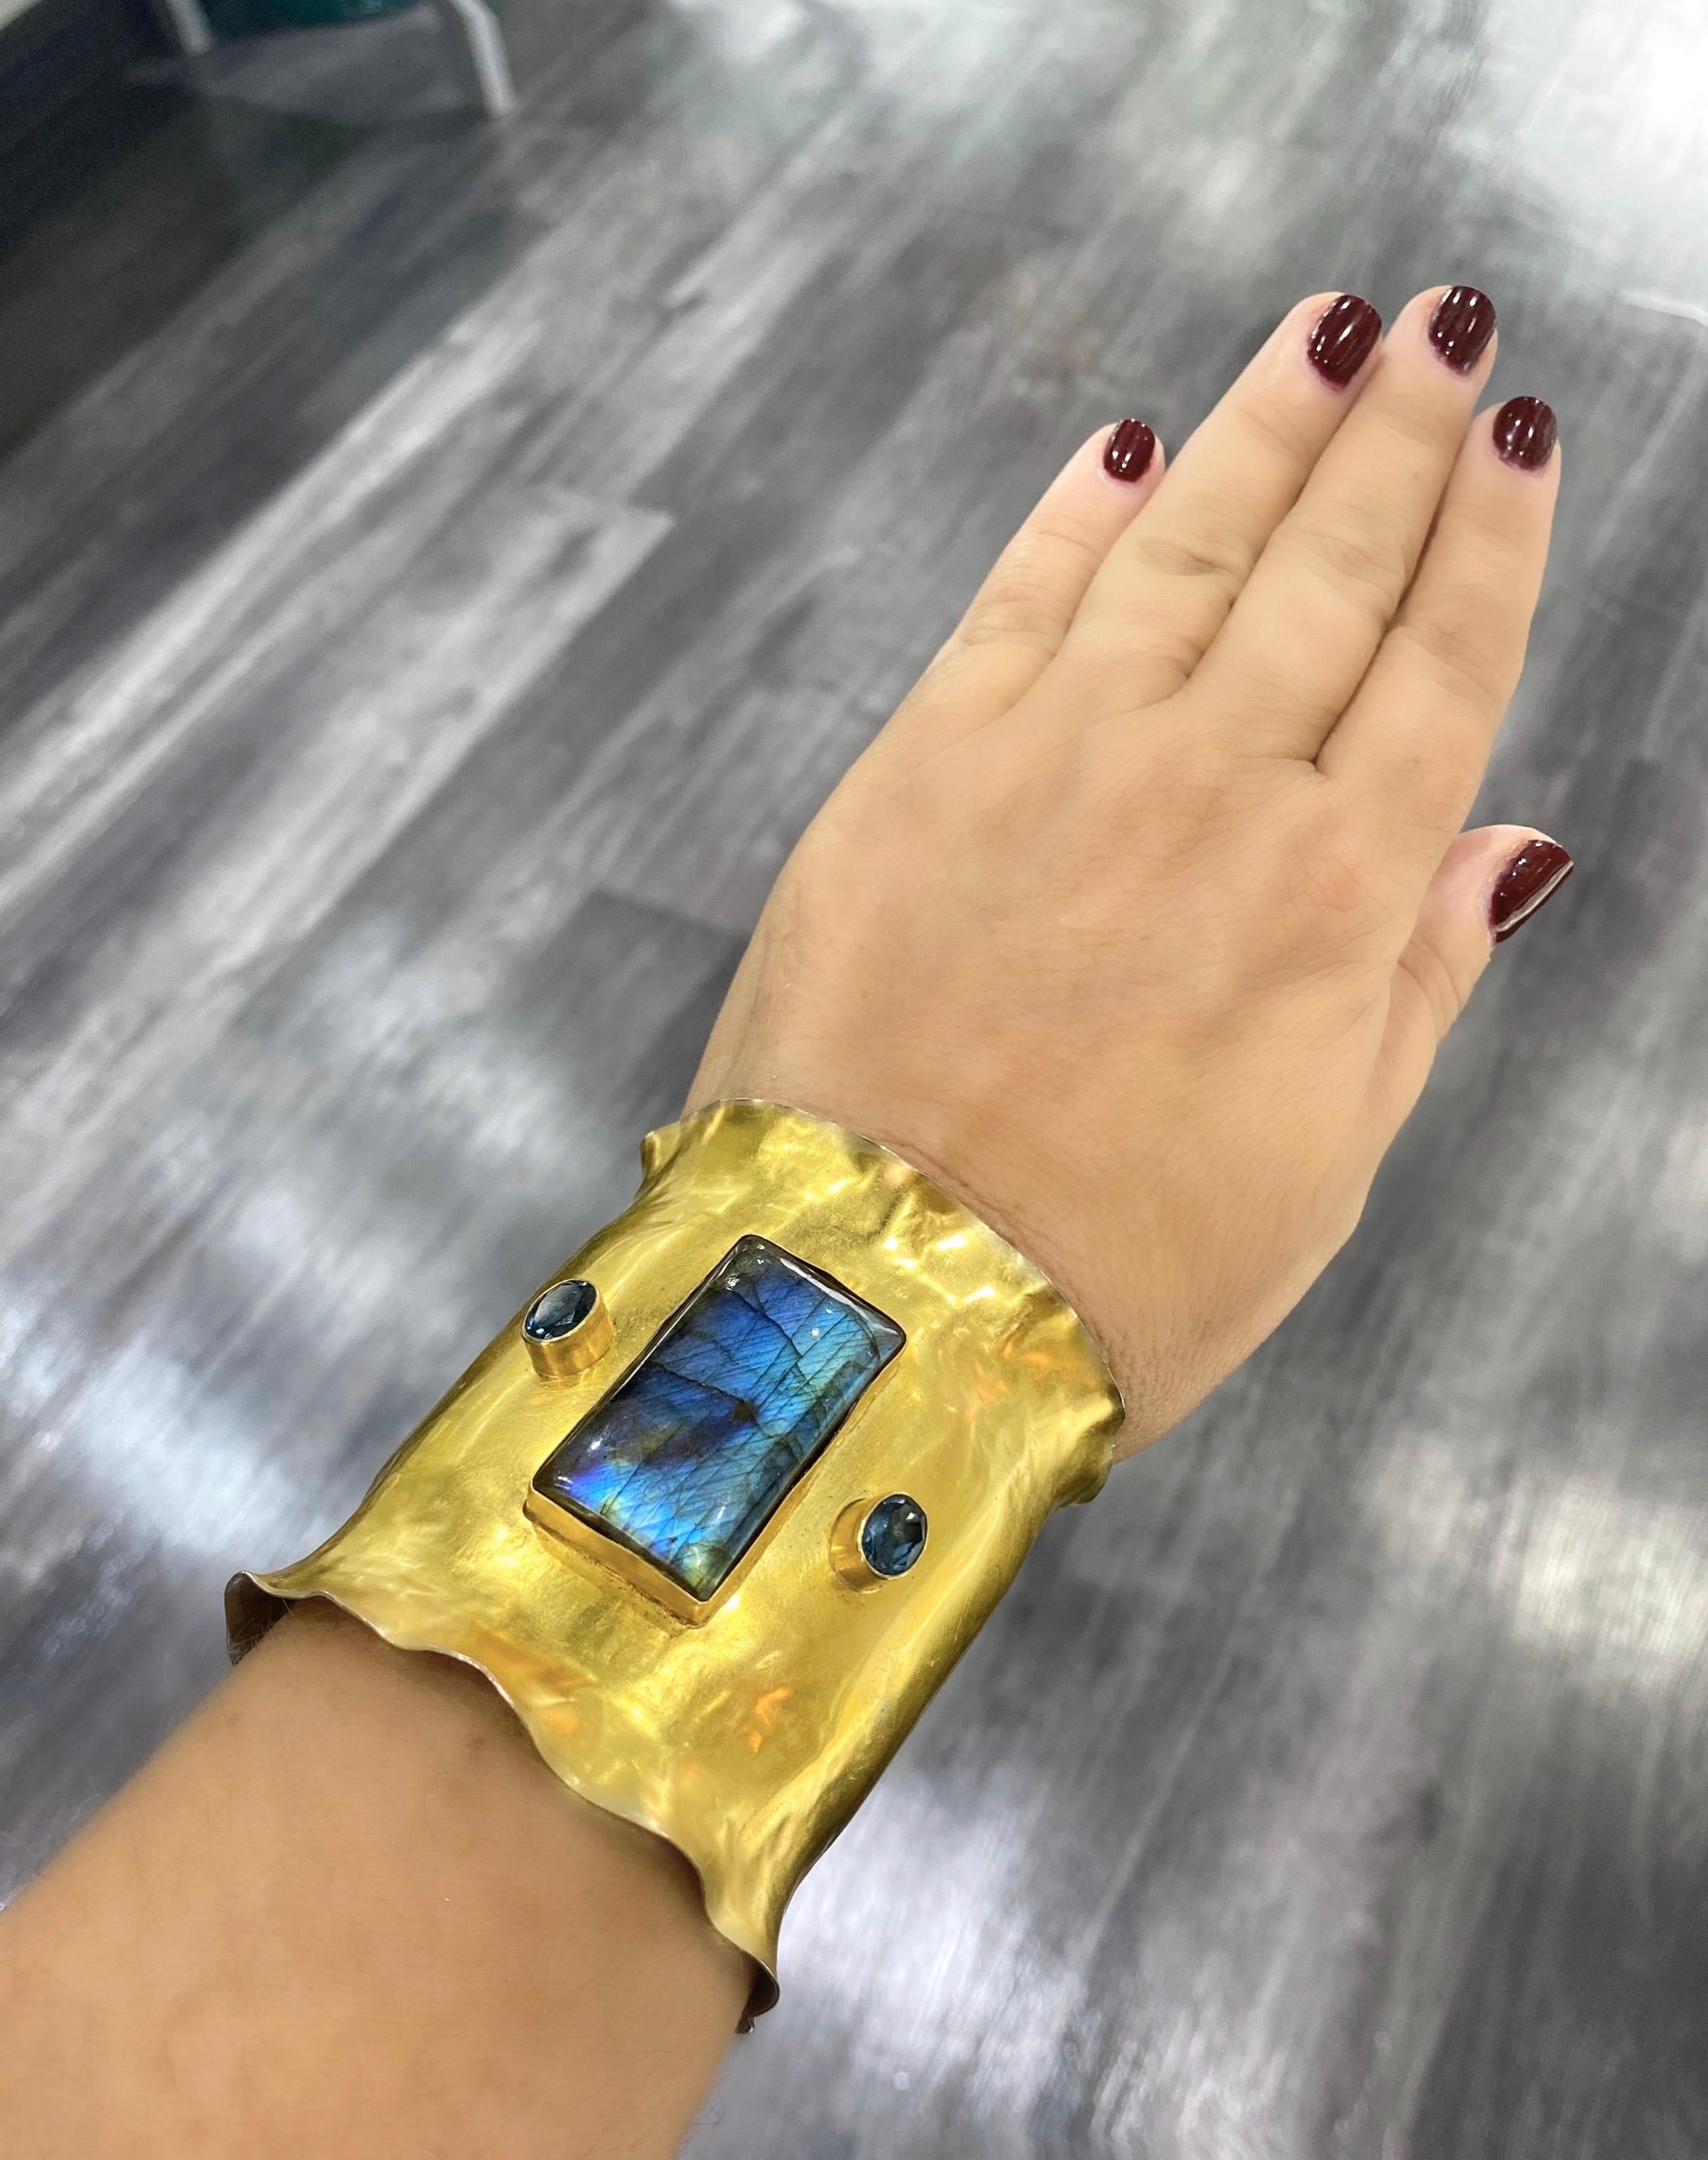 The Bijoux De Mer signature Ruffle Cuff is handcrafted with a stunning large labradorite, 65 ct, and faceted London blue topaz, bezel-set in 18k yellow gold.  The cuff itself is made of 22k gold bi-metal for durability and contrast- a sheet of 22k